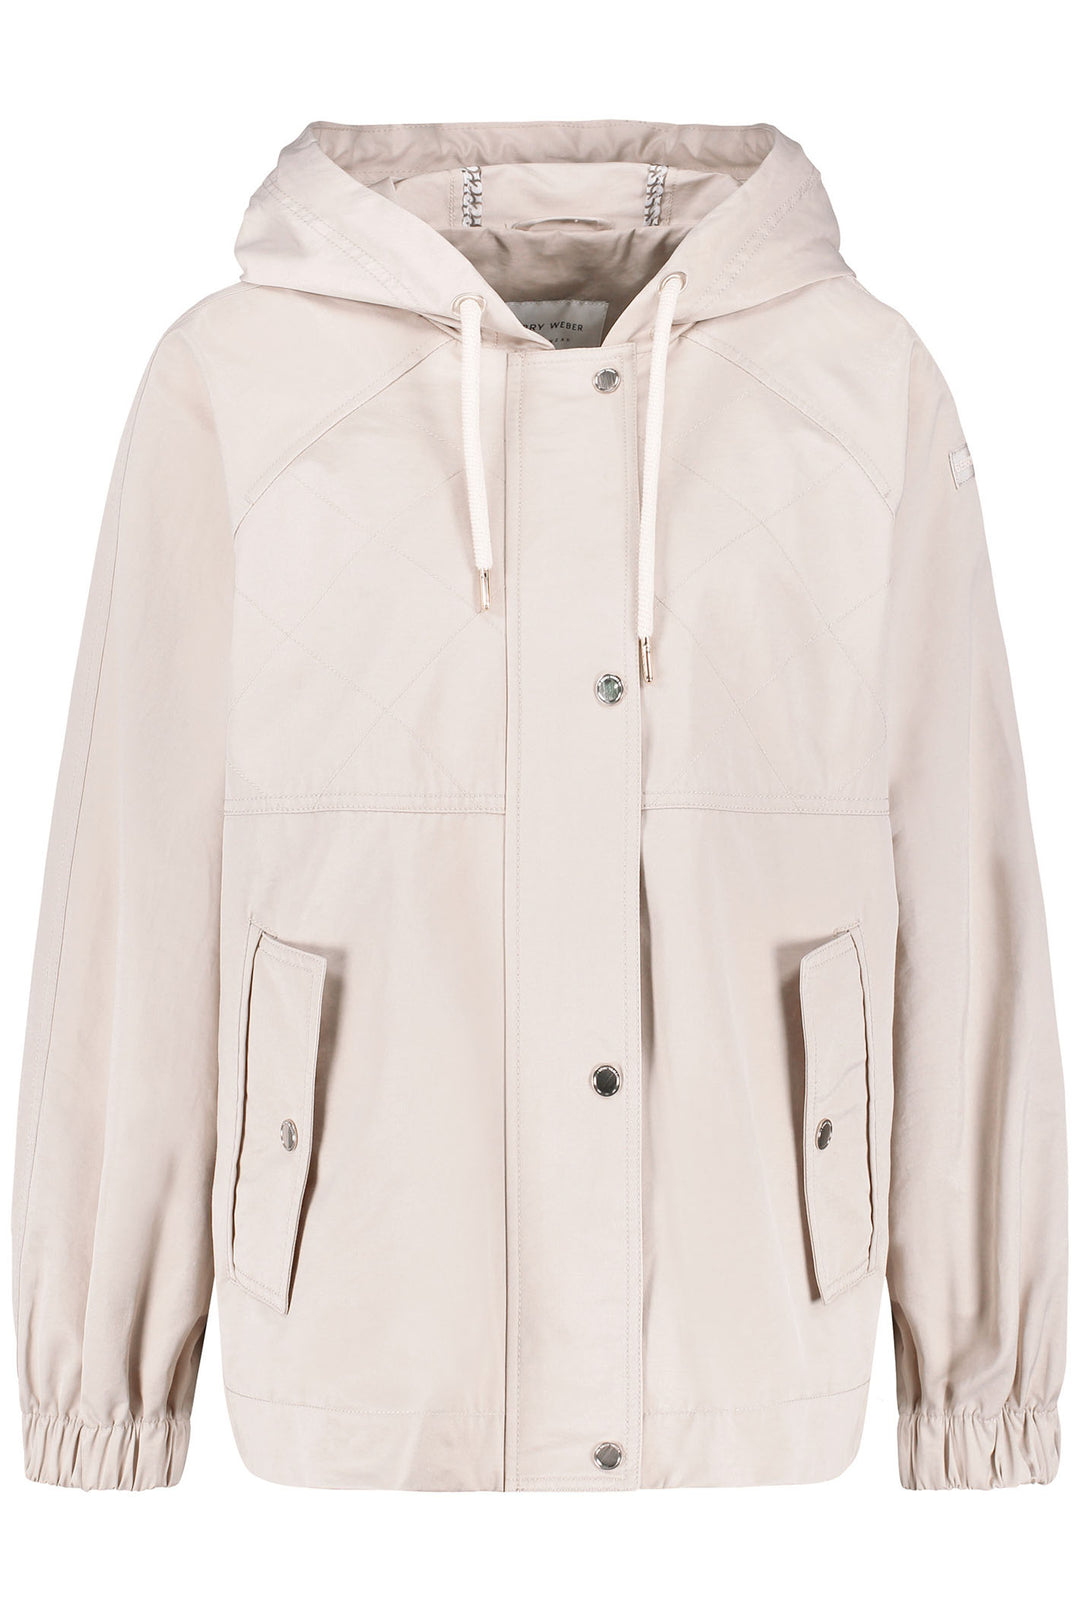 Gerry Weber 350215-31124 Shell Beige Hooded Jacket - Dotique Chesterfield